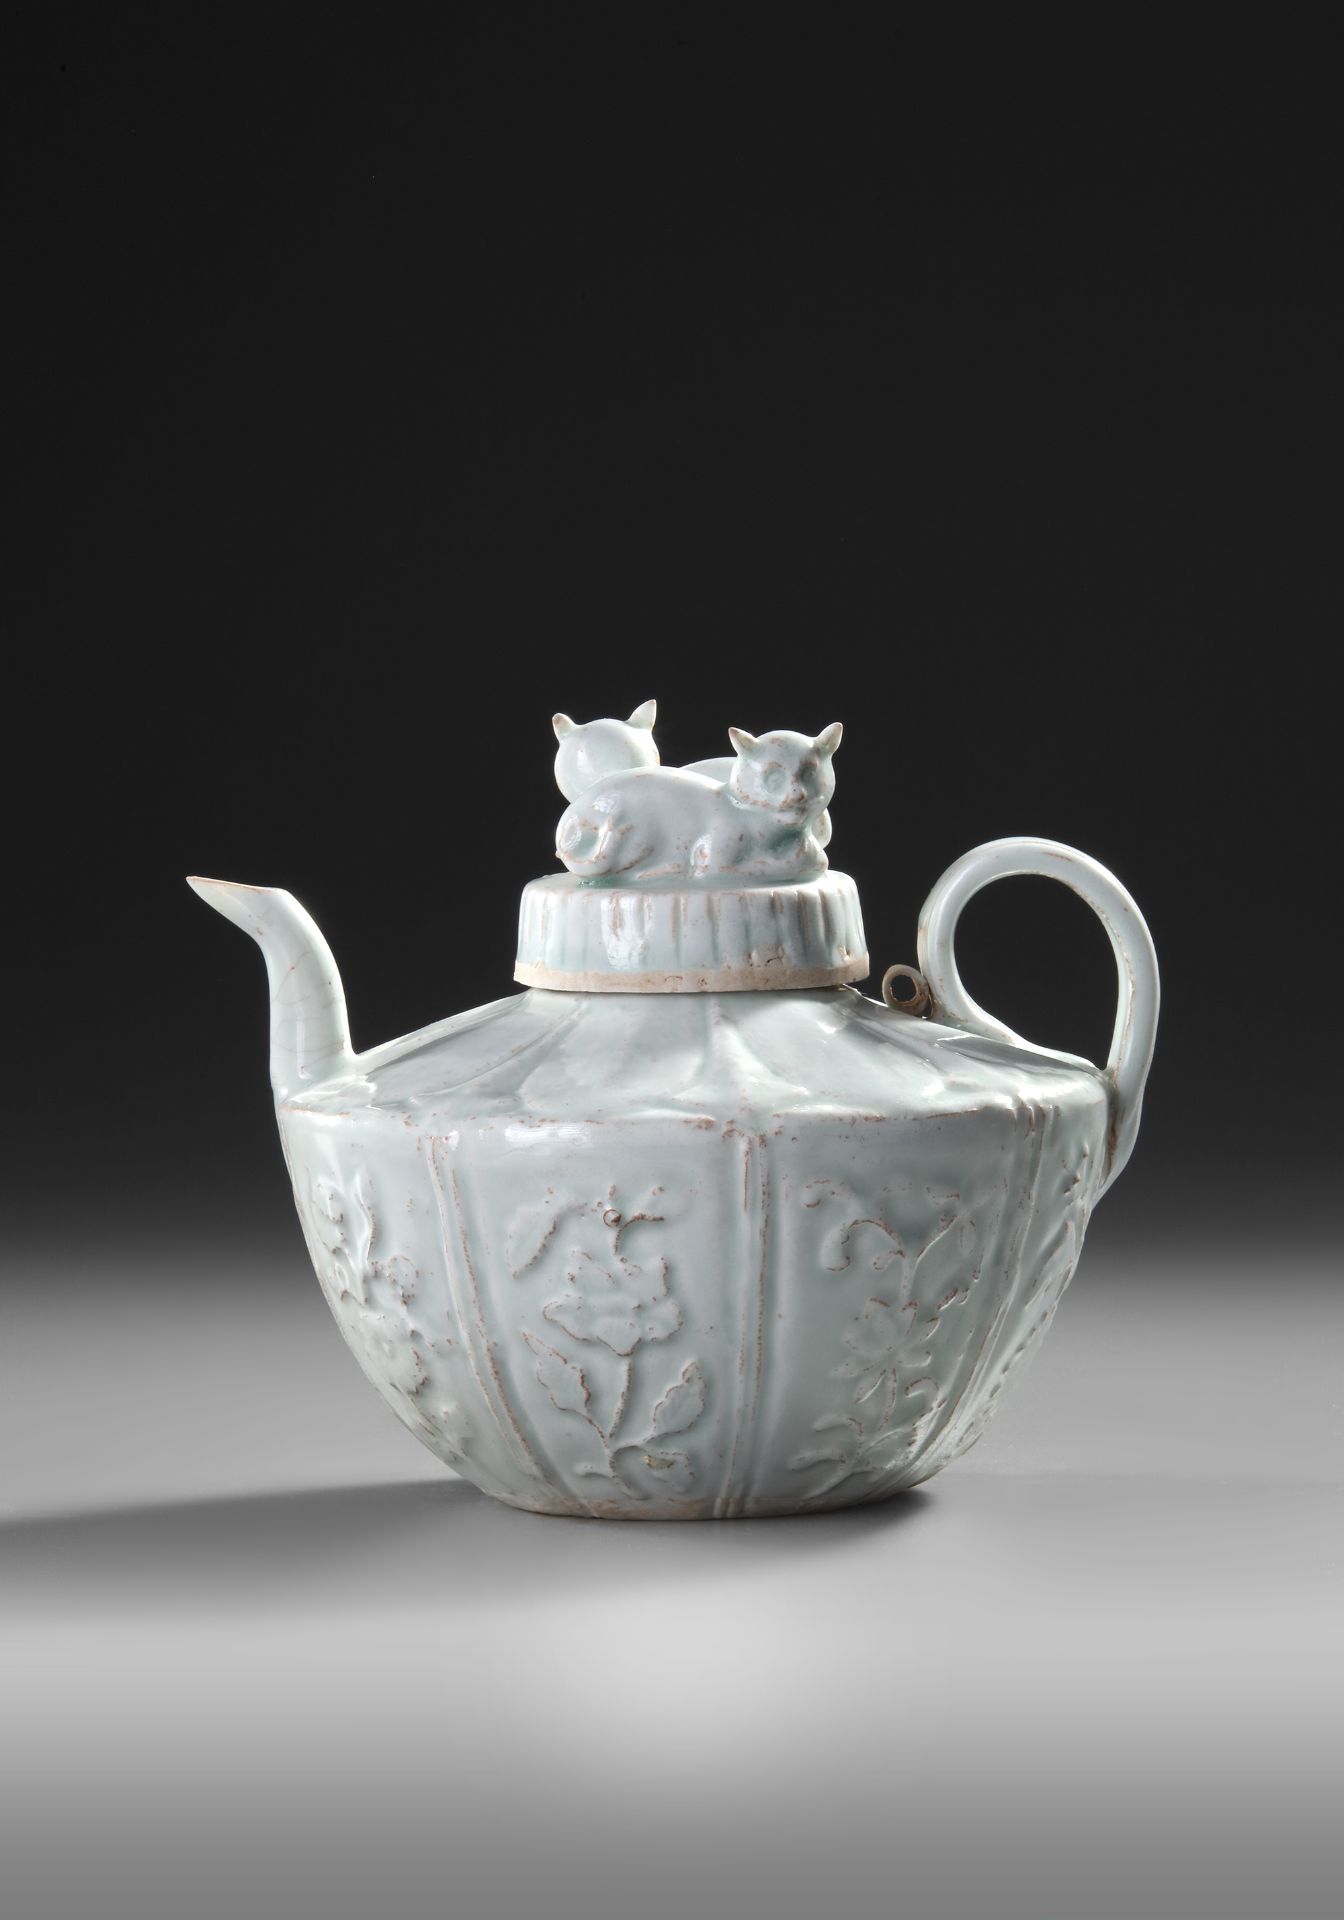 A CHINESE QINGBAI RECUMBENT CATS EWER AND COVER, NORTHERN SONG DYNASTY (960–1127)